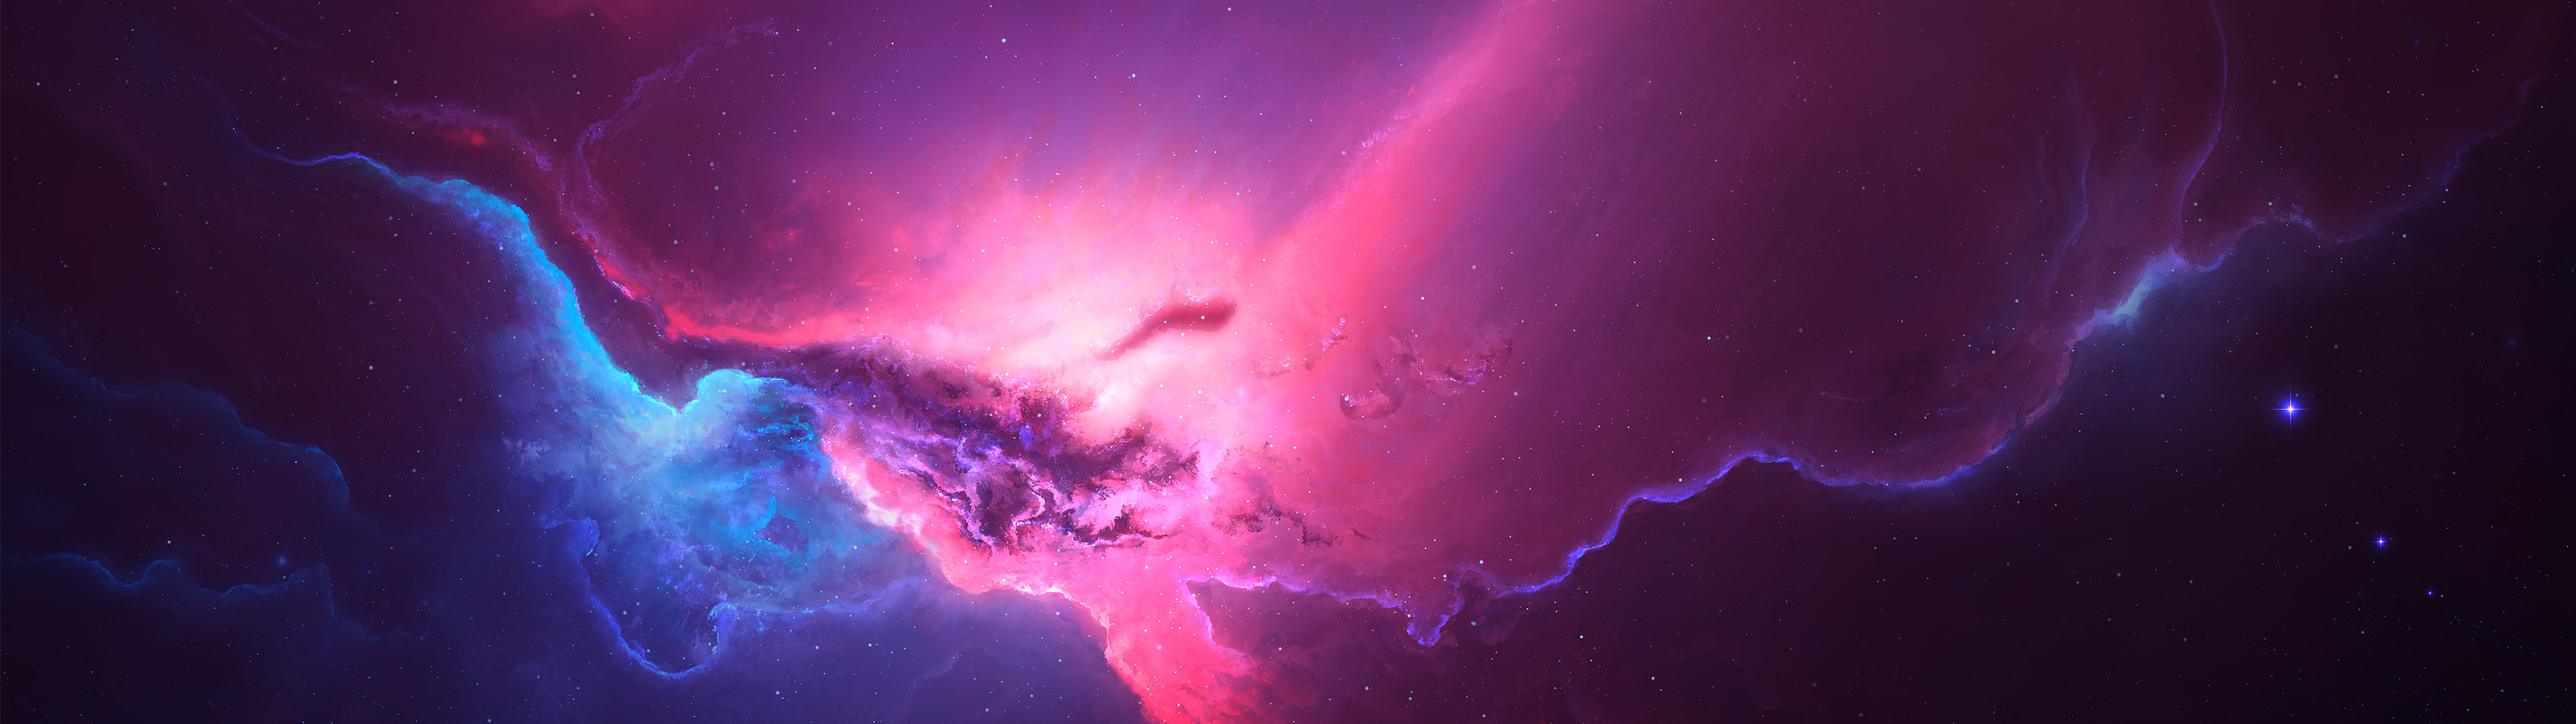 Sci Fi – Nebula Space Blue Pink Red Cosmos Wallpaper